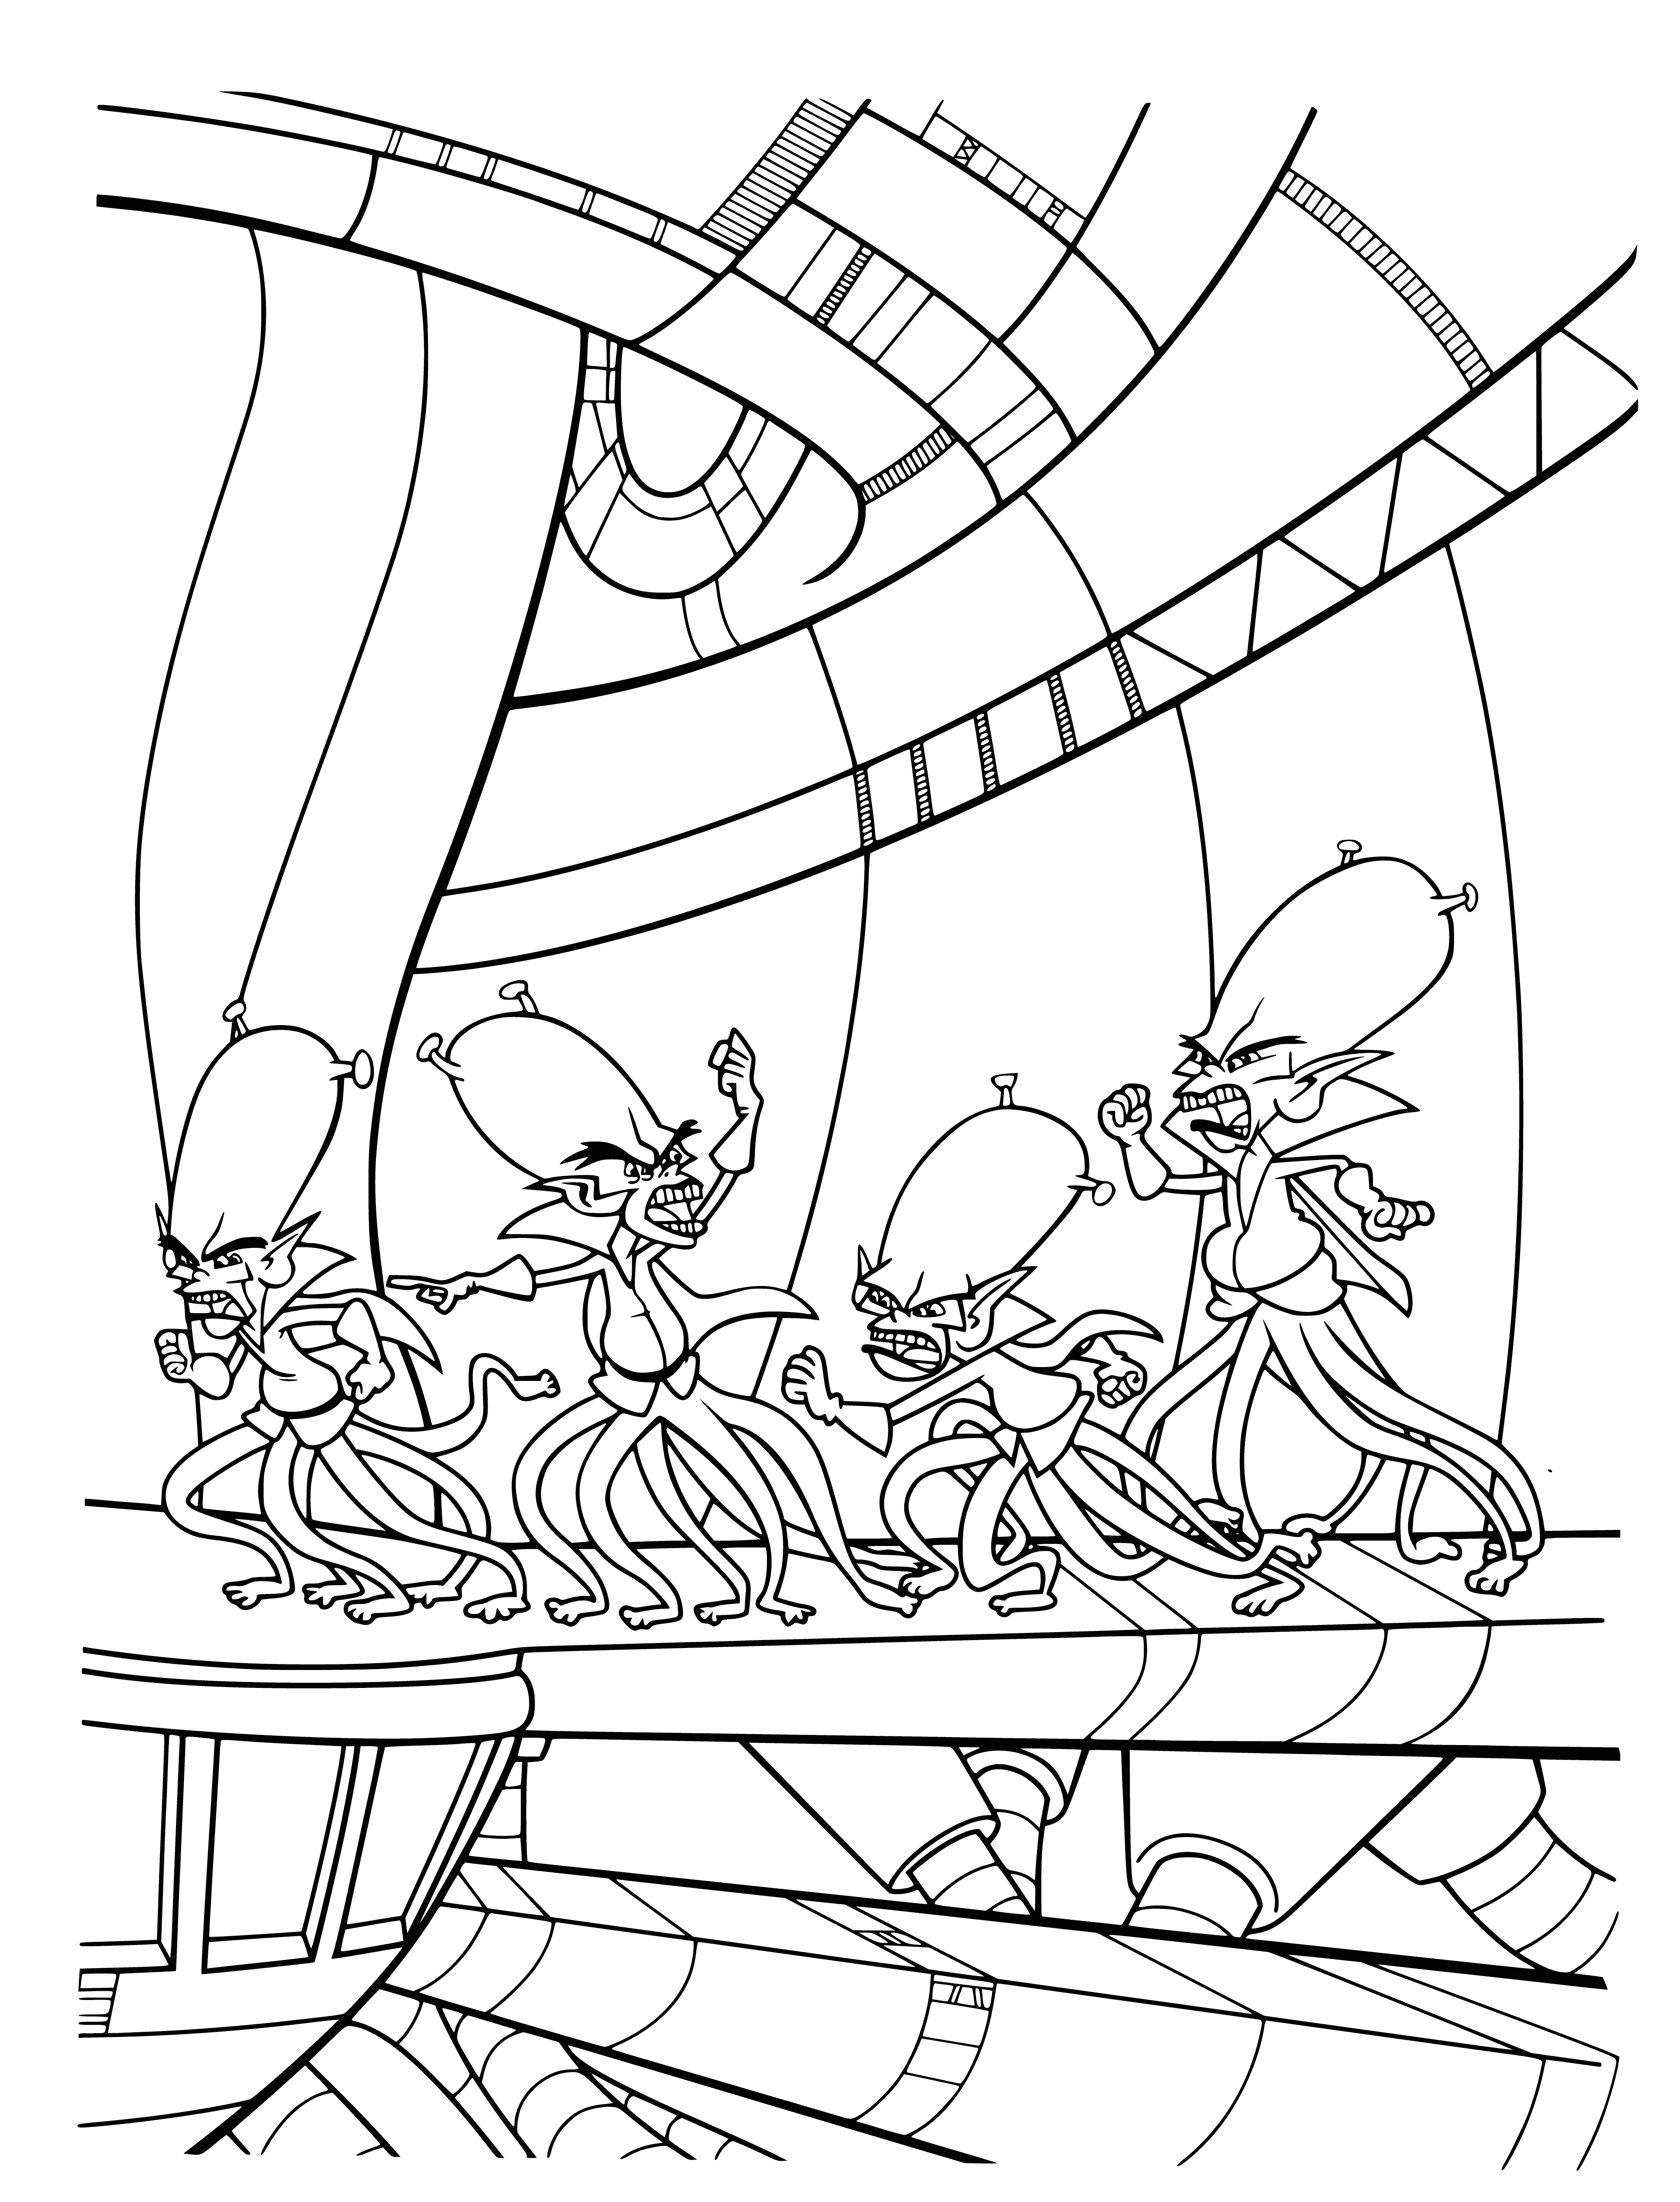 coloring page: Swarms of blue Galactosar clones line up, ready to attack with sharp teeth and claws, and red, glowing eyes.